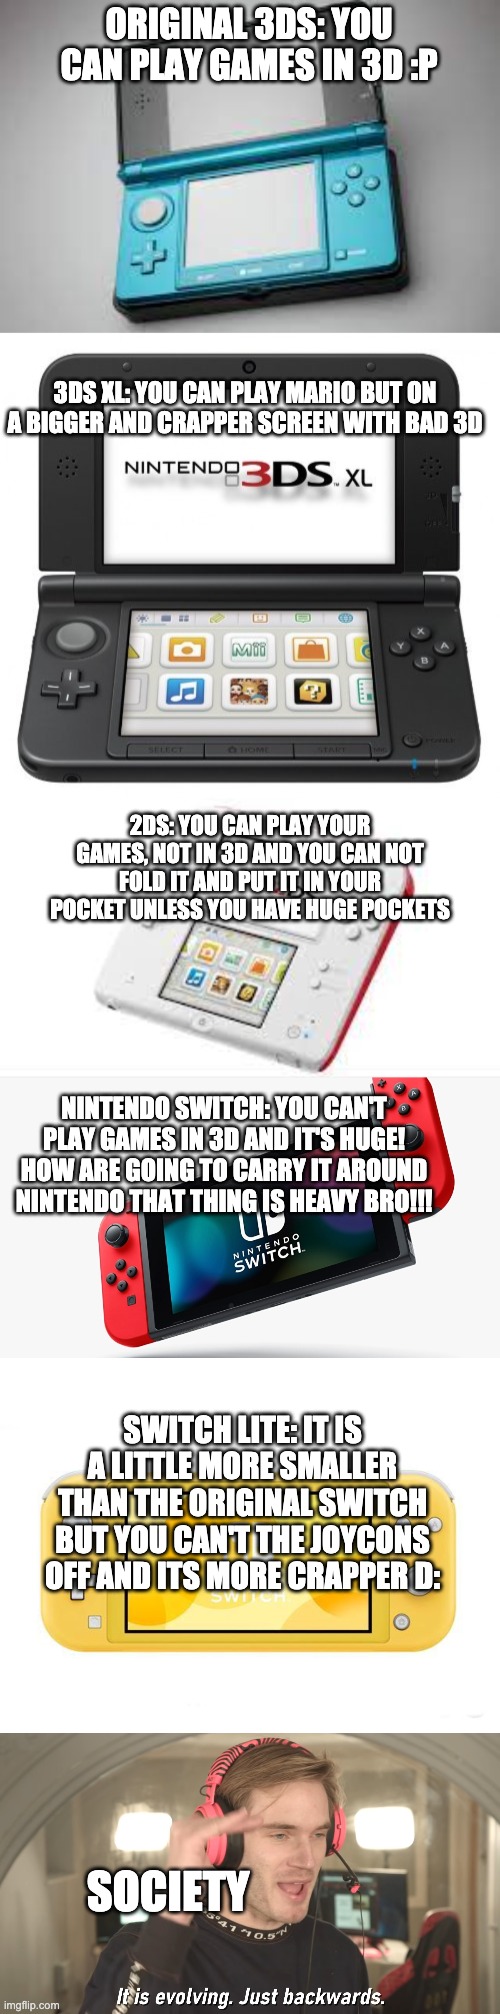 Its evolving just backwards | ORIGINAL 3DS: YOU CAN PLAY GAMES IN 3D :P; 3DS XL: YOU CAN PLAY MARIO BUT ON A BIGGER AND CRAPPER SCREEN WITH BAD 3D; 2DS: YOU CAN PLAY YOUR GAMES, NOT IN 3D AND YOU CAN NOT FOLD IT AND PUT IT IN YOUR POCKET UNLESS YOU HAVE HUGE POCKETS; NINTENDO SWITCH: YOU CAN'T PLAY GAMES IN 3D AND IT'S HUGE! HOW ARE GOING TO CARRY IT AROUND NINTENDO THAT THING IS HEAVY BRO!!! SWITCH LITE: IT IS A LITTLE MORE SMALLER THAN THE ORIGINAL SWITCH BUT YOU CAN'T THE JOYCONS OFF AND ITS MORE CRAPPER D:; SOCIETY | image tagged in its evolving just backwards | made w/ Imgflip meme maker